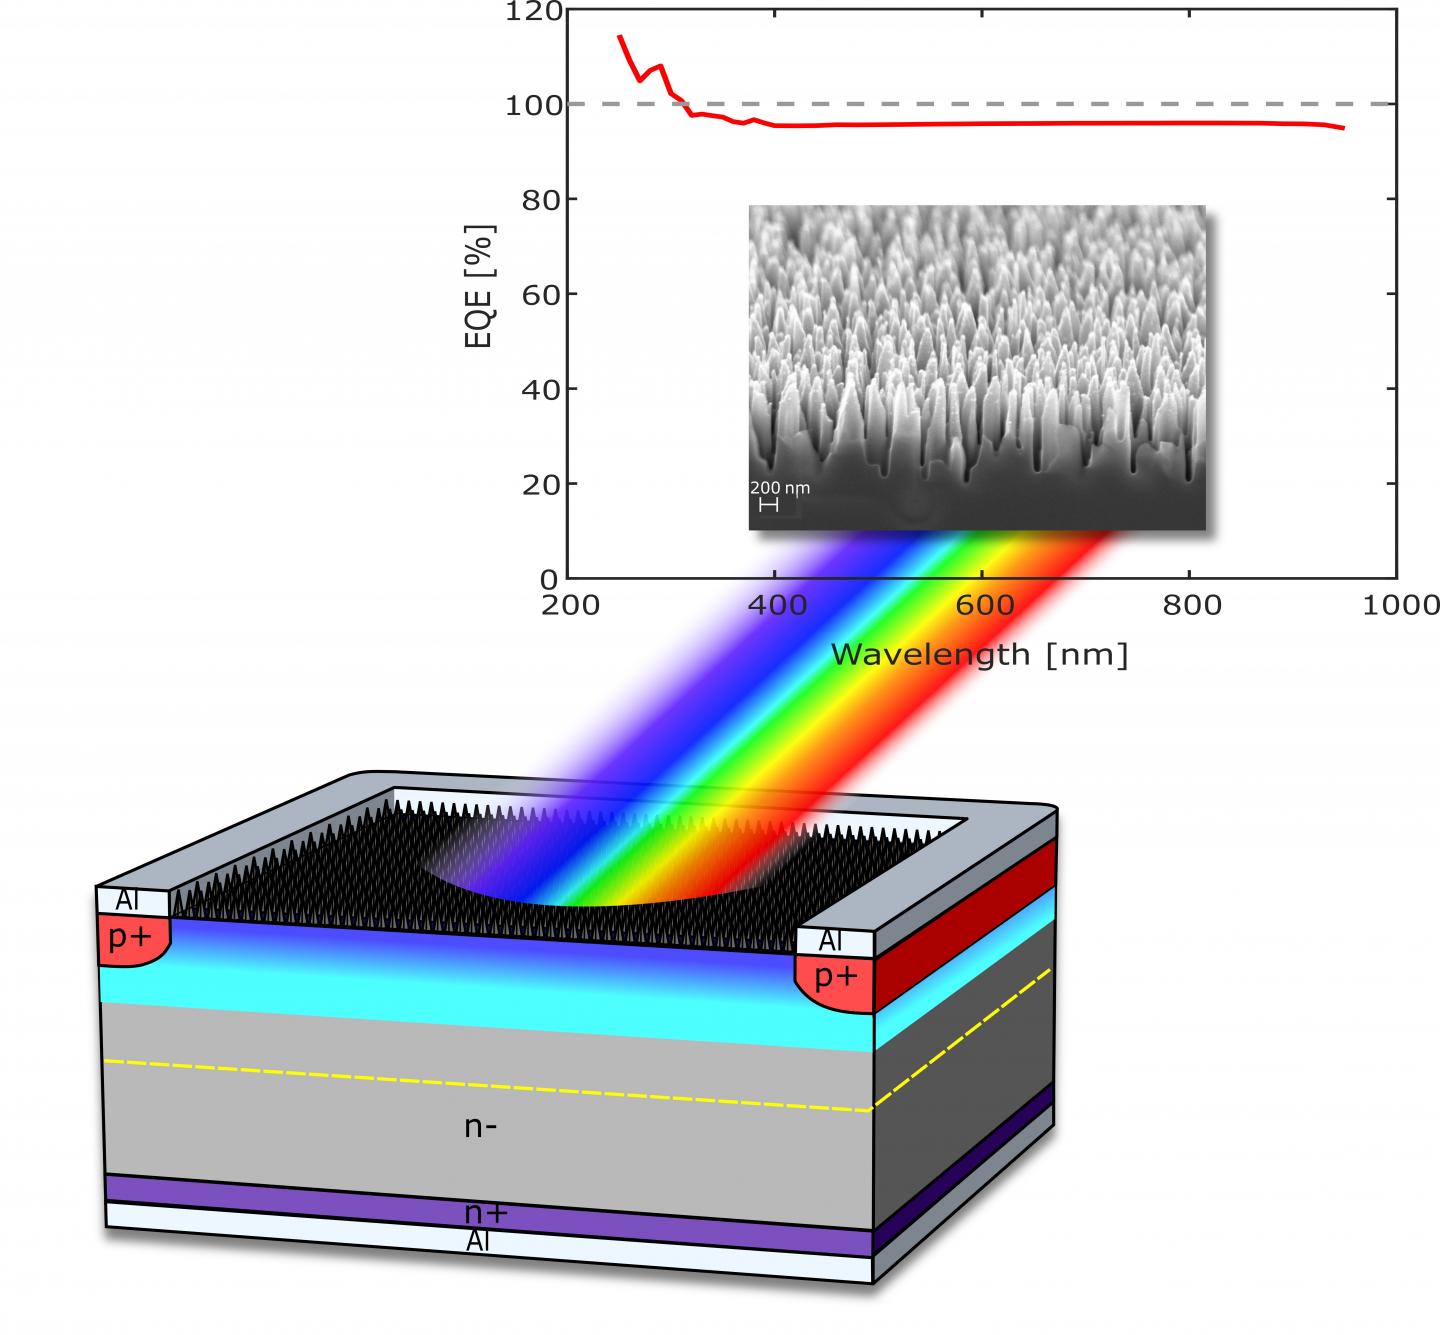 Structure and performance of the novel photodetector